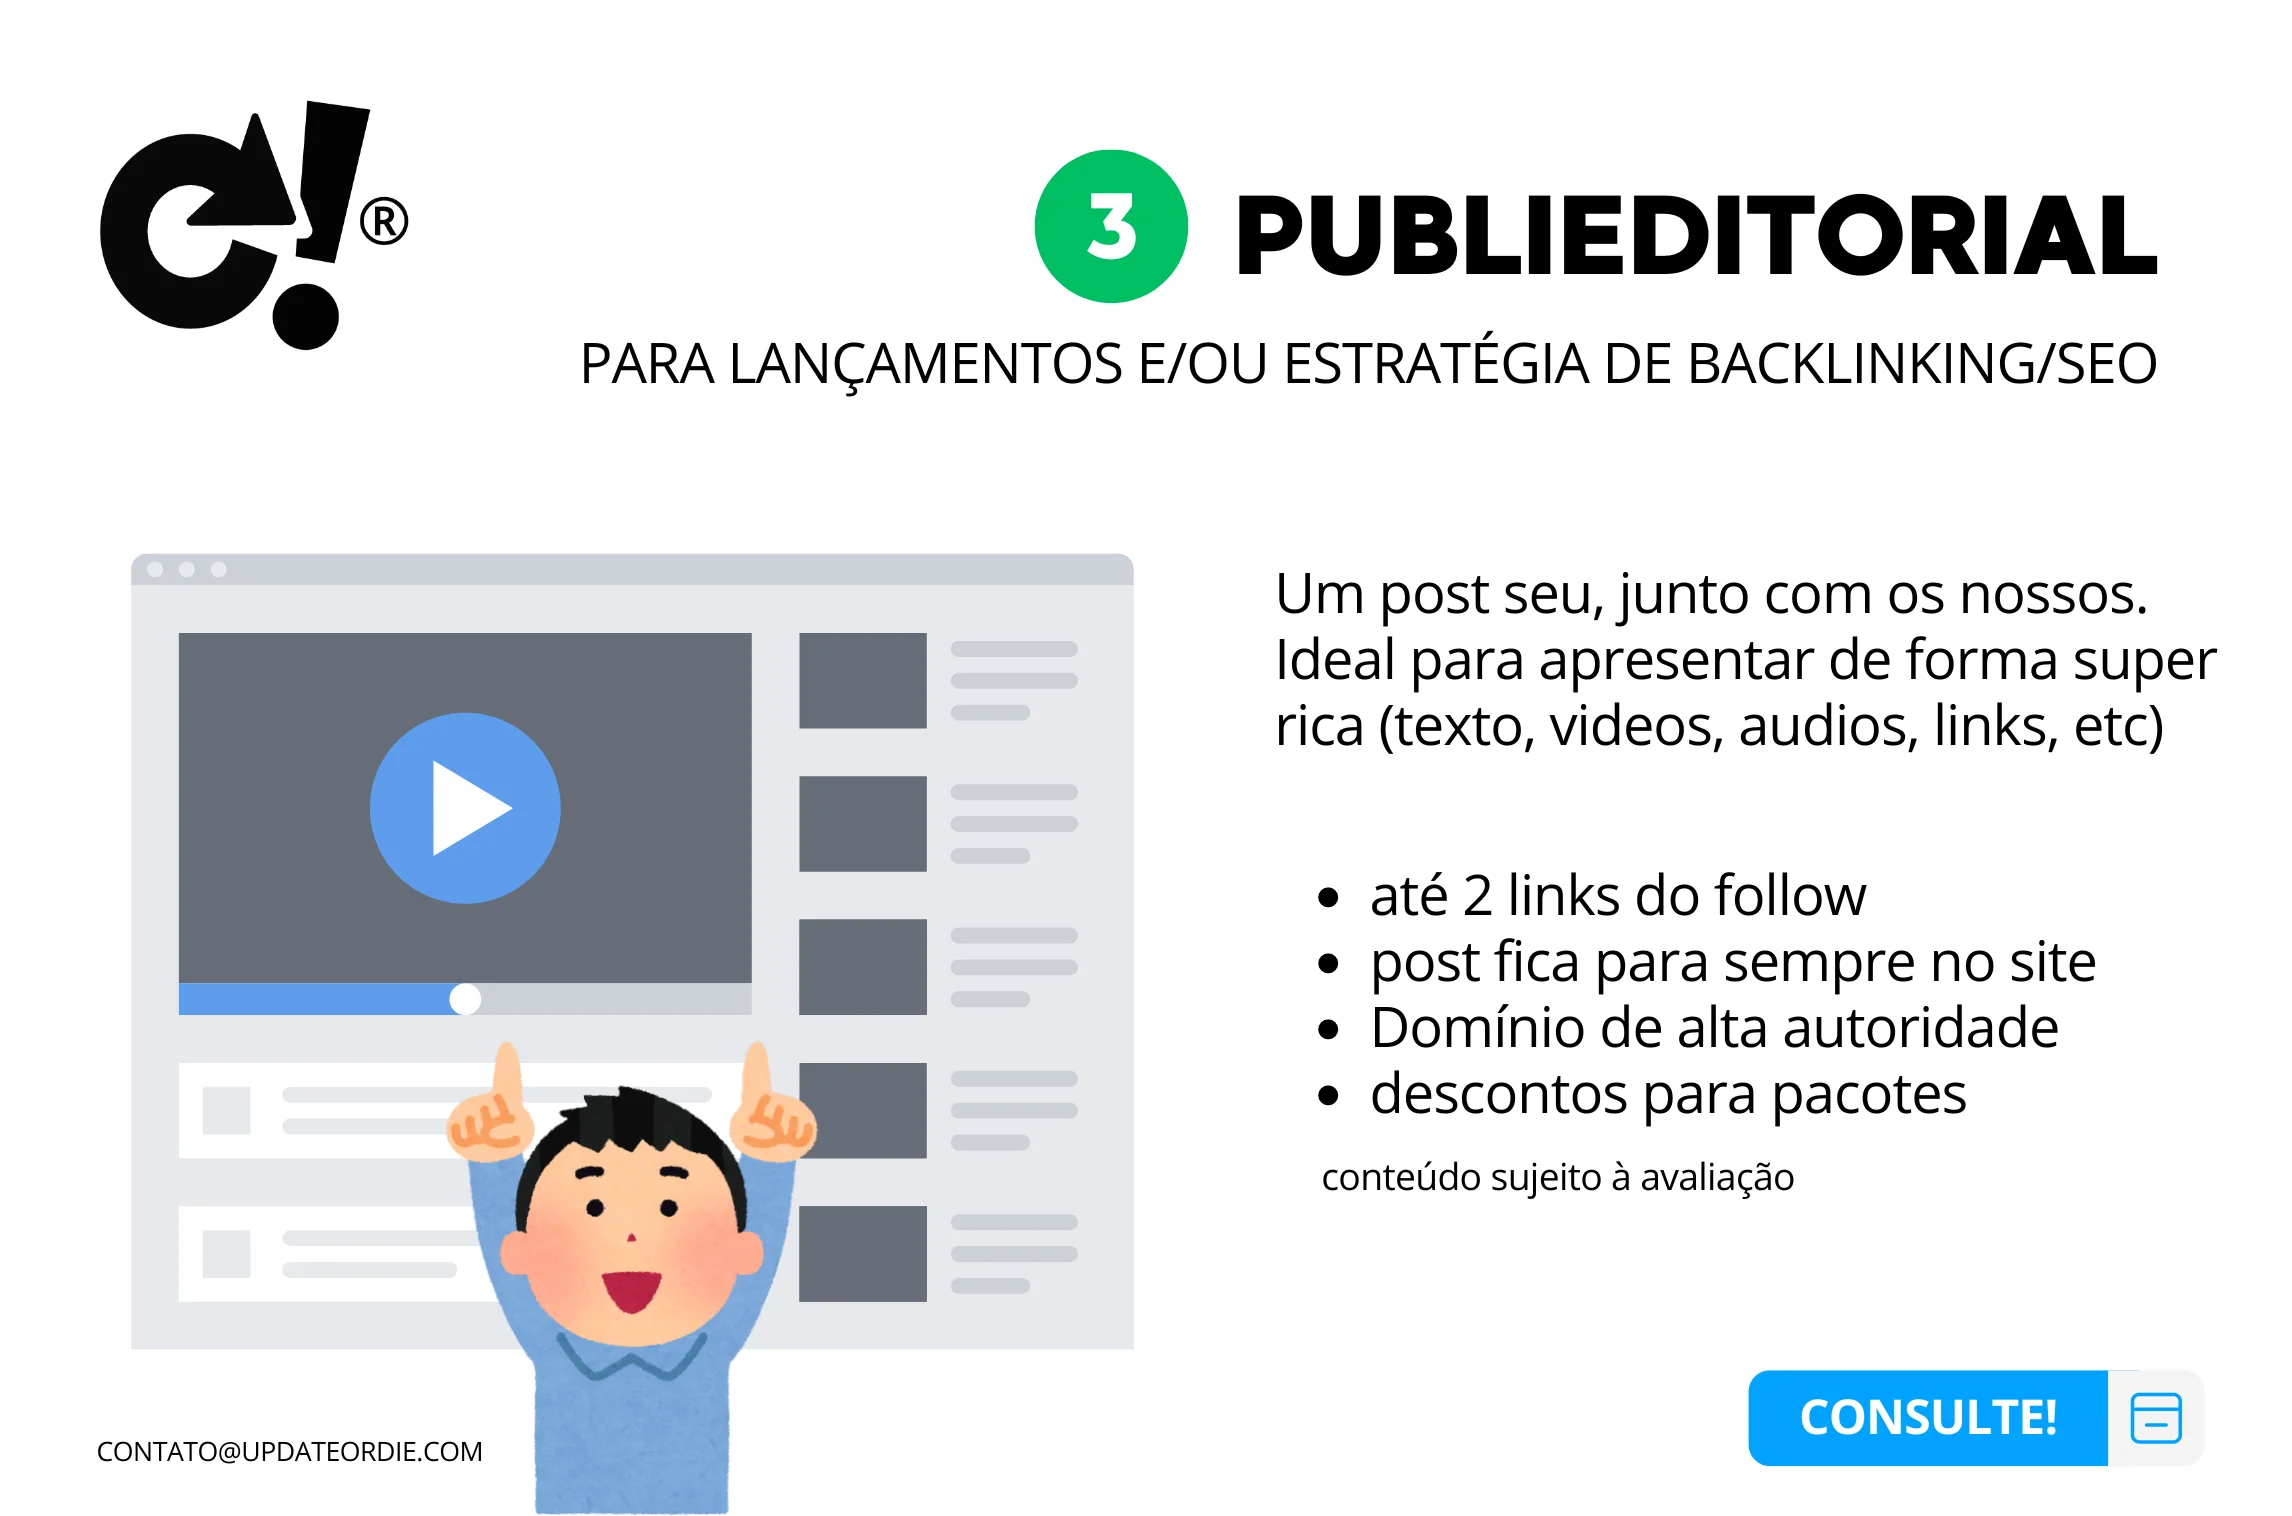 Infographic explaining Publieditorial services for launches or SEO backlinking strategy featuring a cartoon character pointing upwards, a web page mockup with a play button, and list of benefits including dofollow links and domain authority.